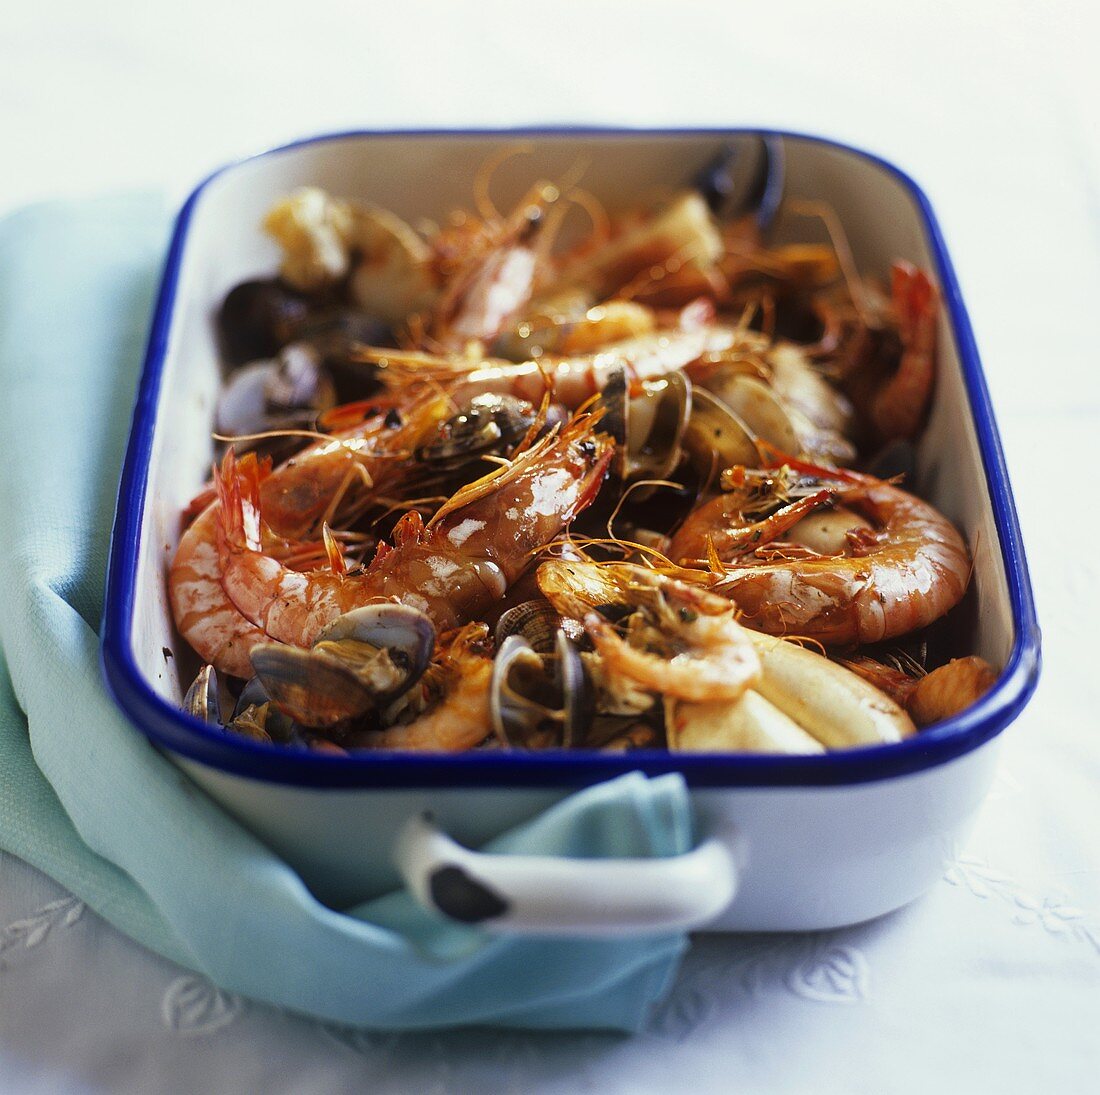 Oven-baked mixed seafood